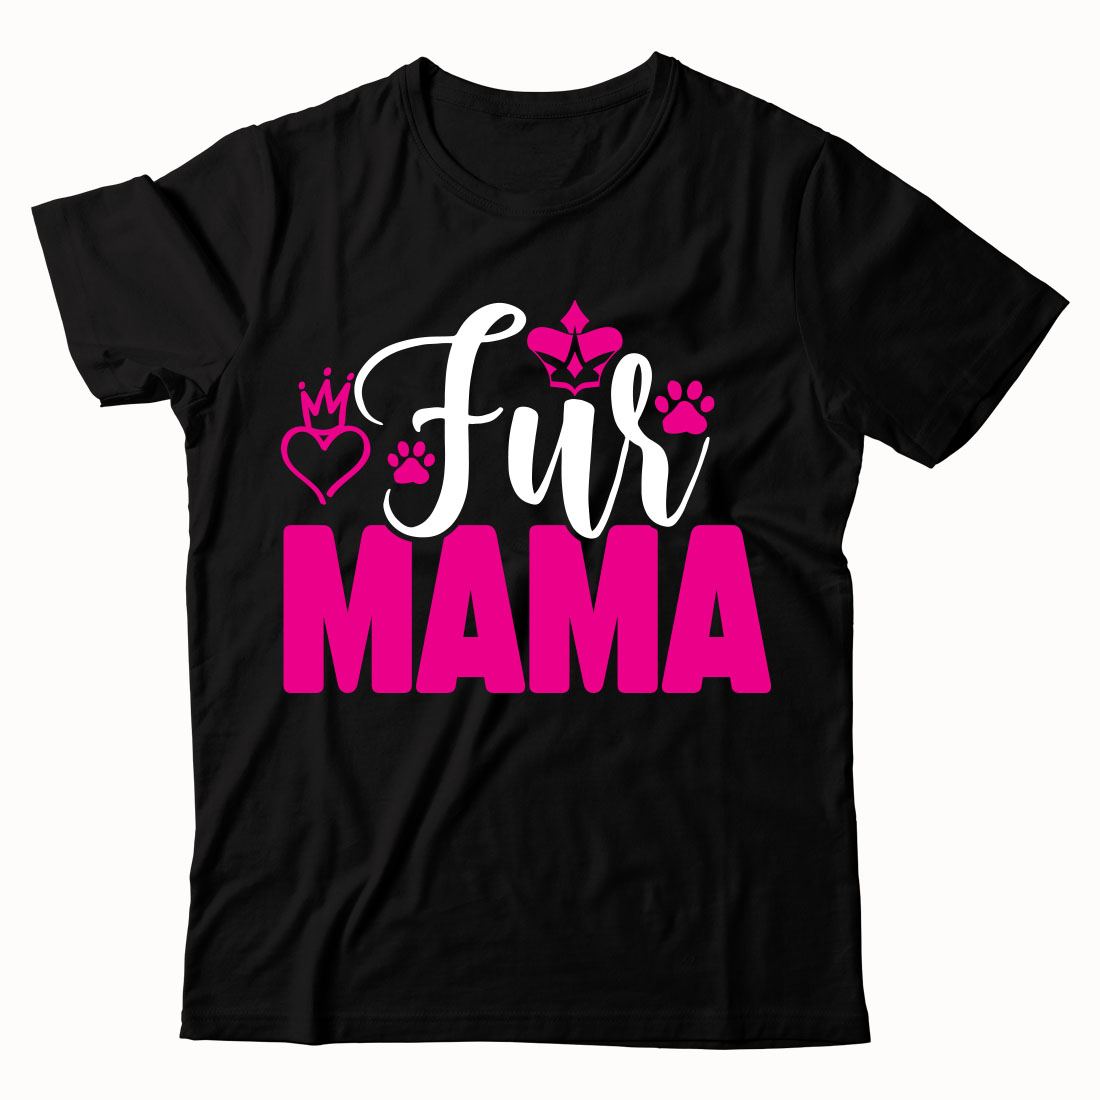 Black shirt with pink lettering that says fur mama.